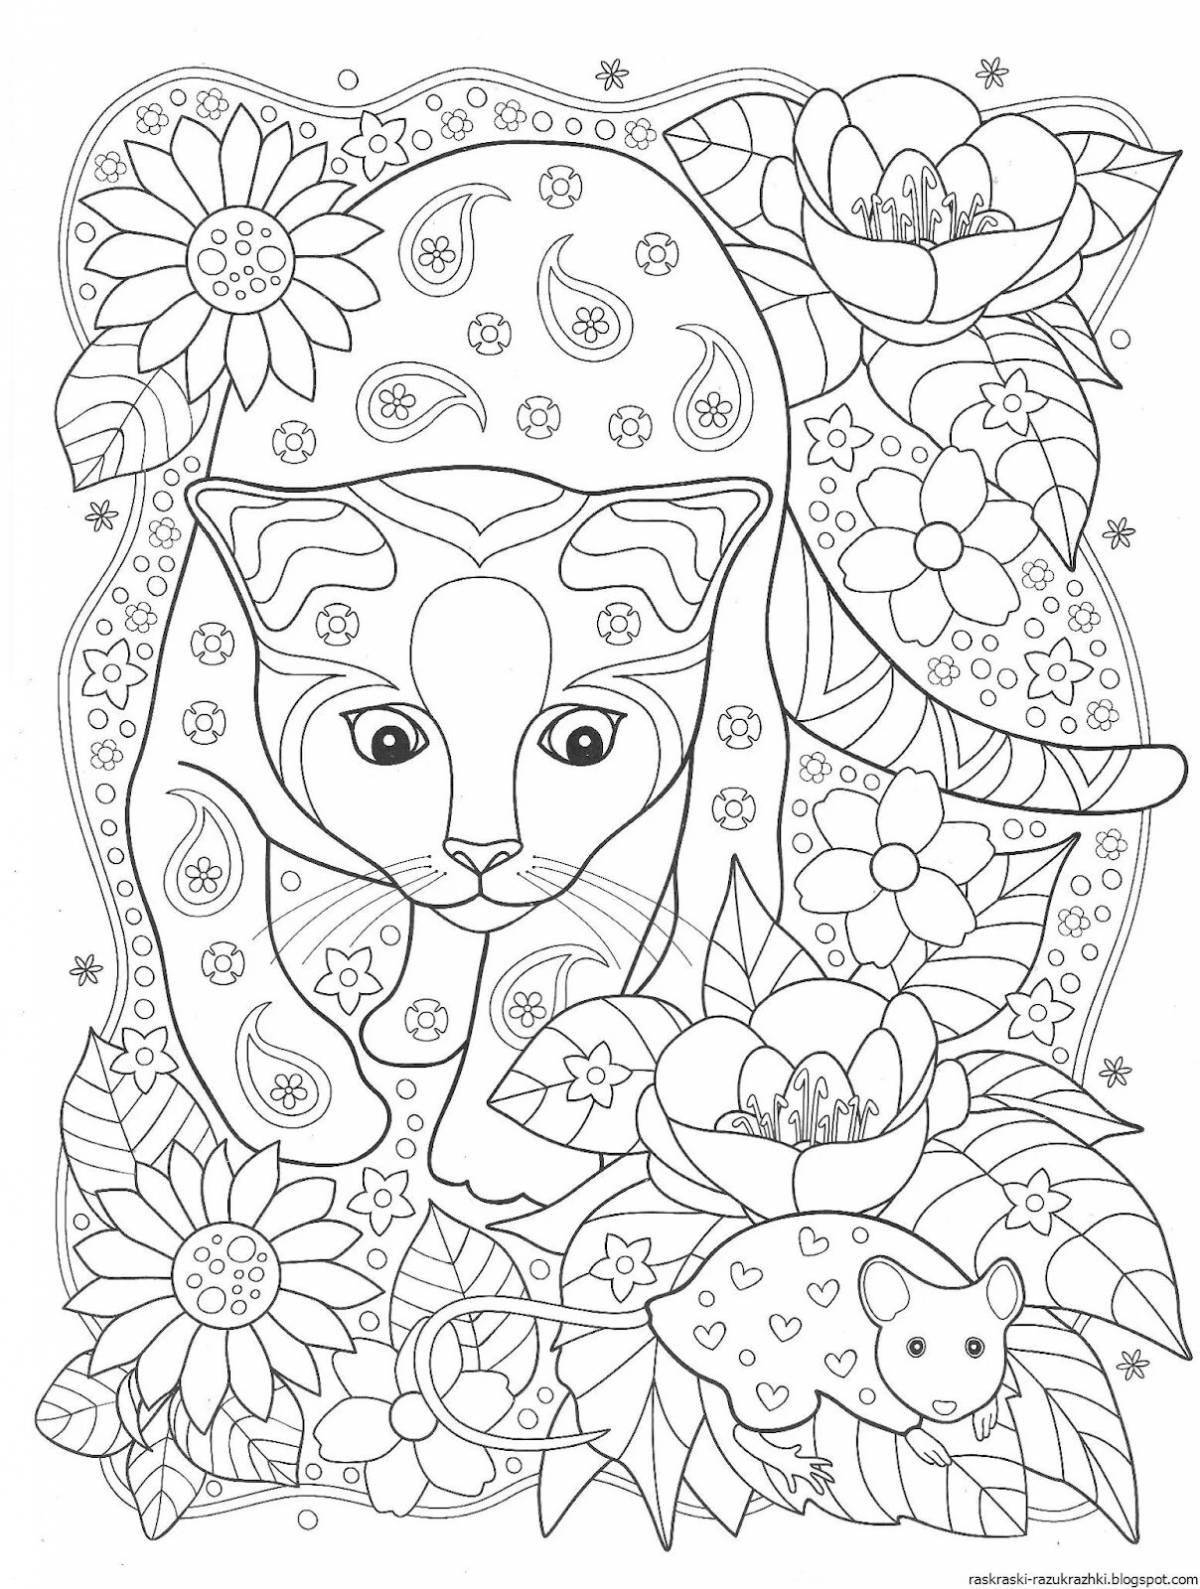 Playful coloring for girls 7 years old animals